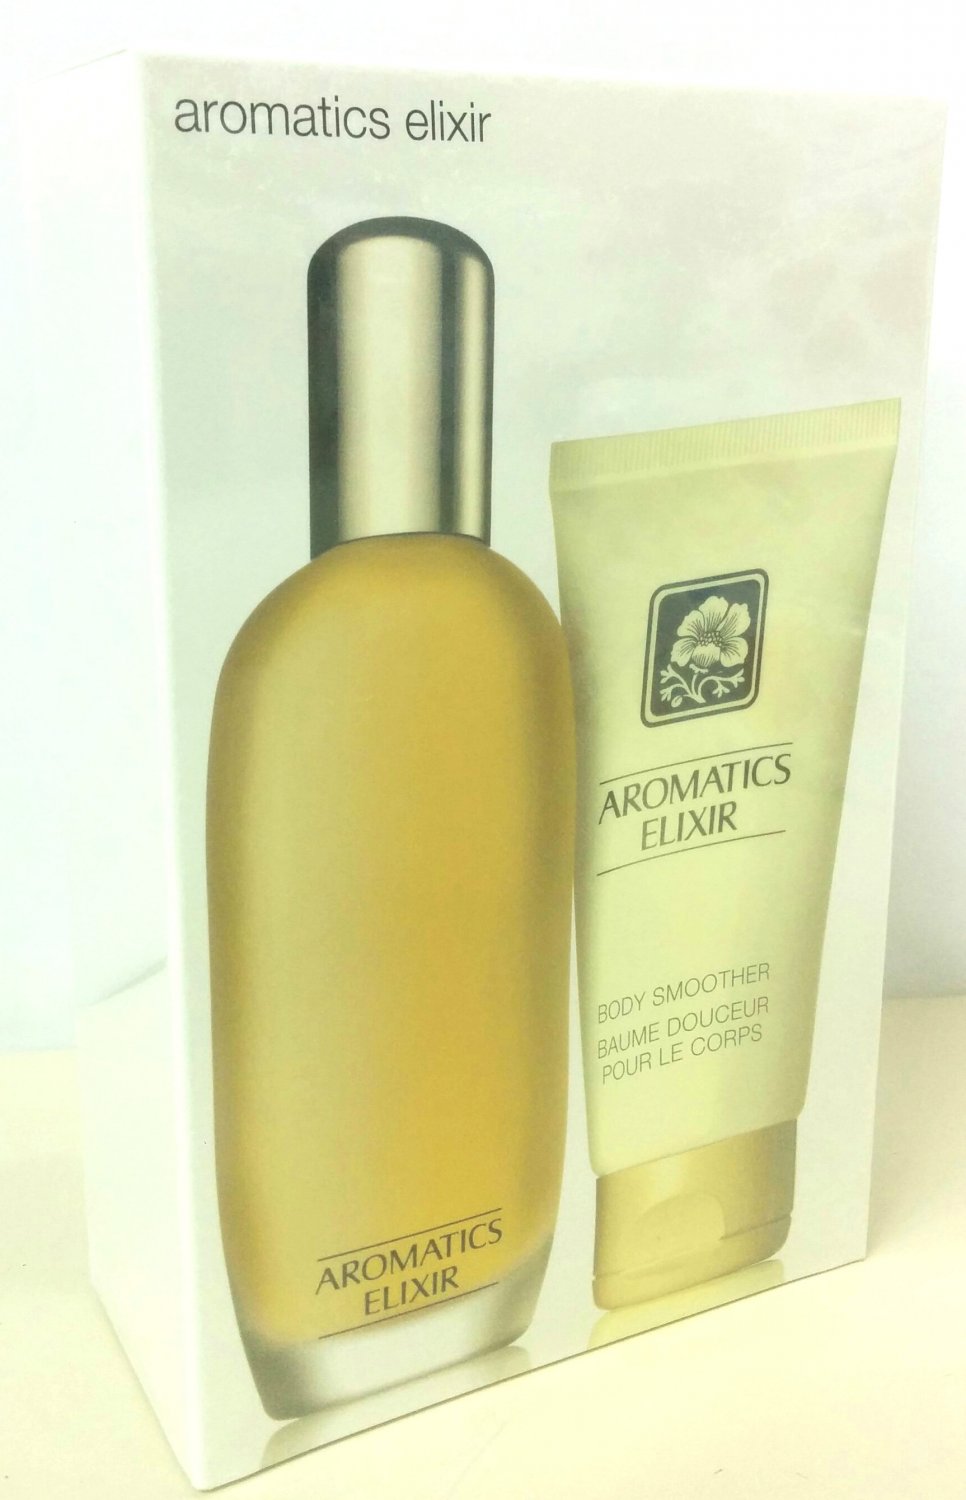 Clinique Aromatics Elixir Edp 100ml Body Smoother Lotion 75ml New And 100 Original